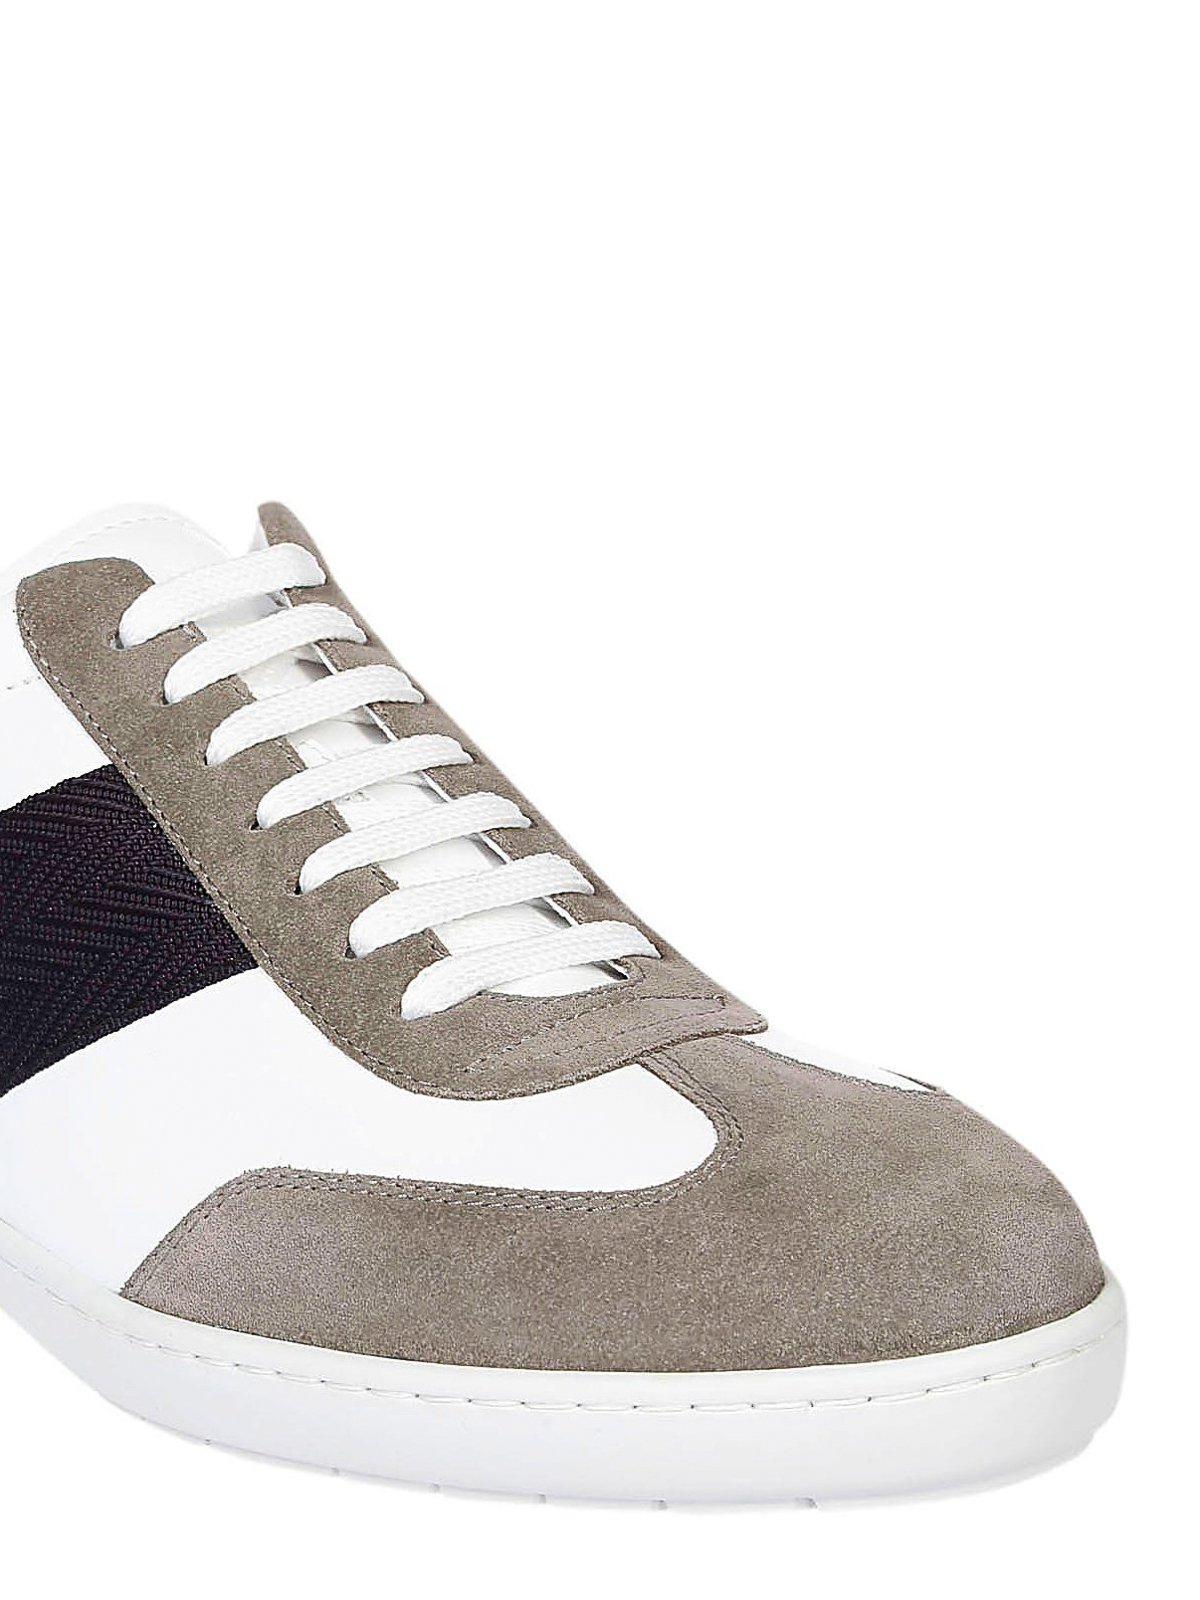 Trainers Giorgio Armani - Two-tone leather and suede sneakers -  X2X097XL930N961